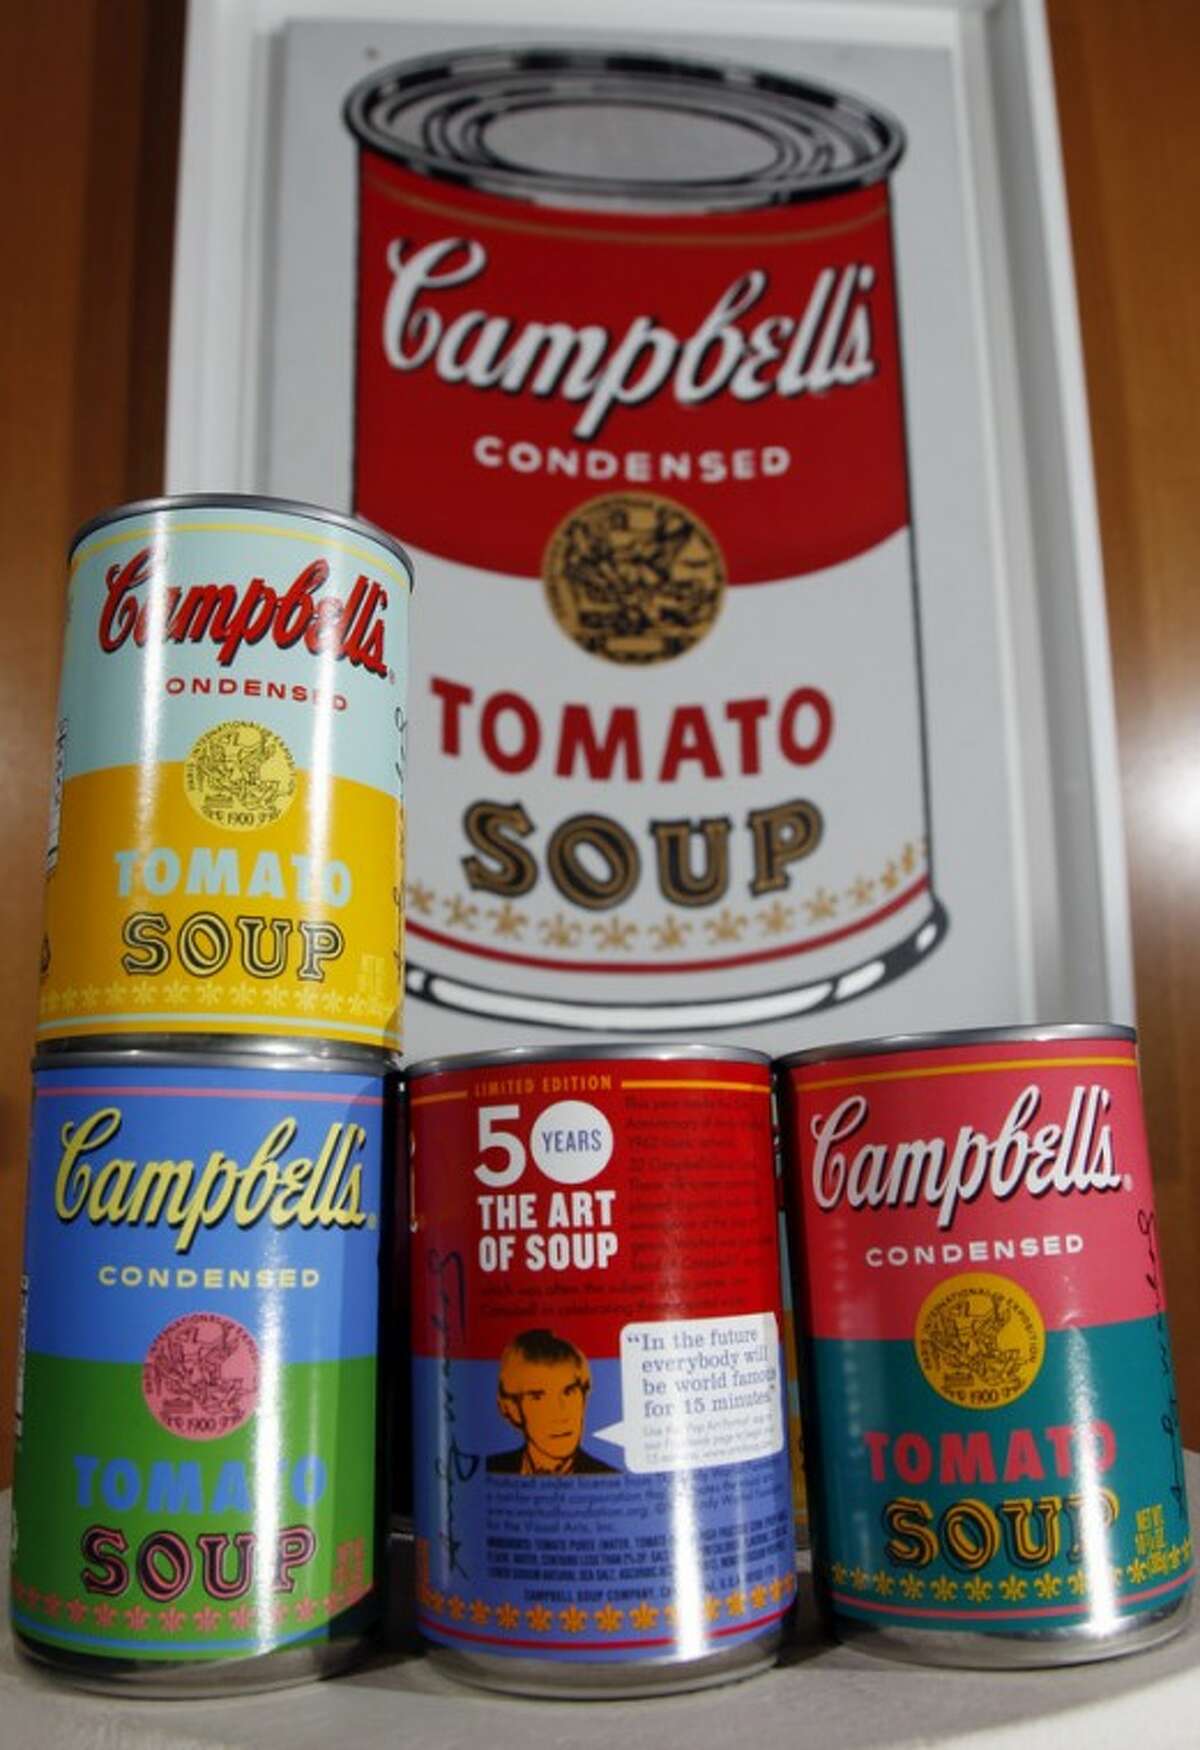 In this photograph taken Aug. 24, 2012, new limited edition Campbell's tomato soup cans with art and sayings by artist Andy Warhol are displayed in front of an original Warhol Pop Art painting from the 1960's in the boardroom at Campbell Soup Company in Camden, N.J. Campbell plans to introduce the special-edition cans of its condensed tomato soup bearing labels reminiscent of the pop artist's paintings at Target stores starting Sunday, Sept. 2, 2012. (Photo/Mel Evans)